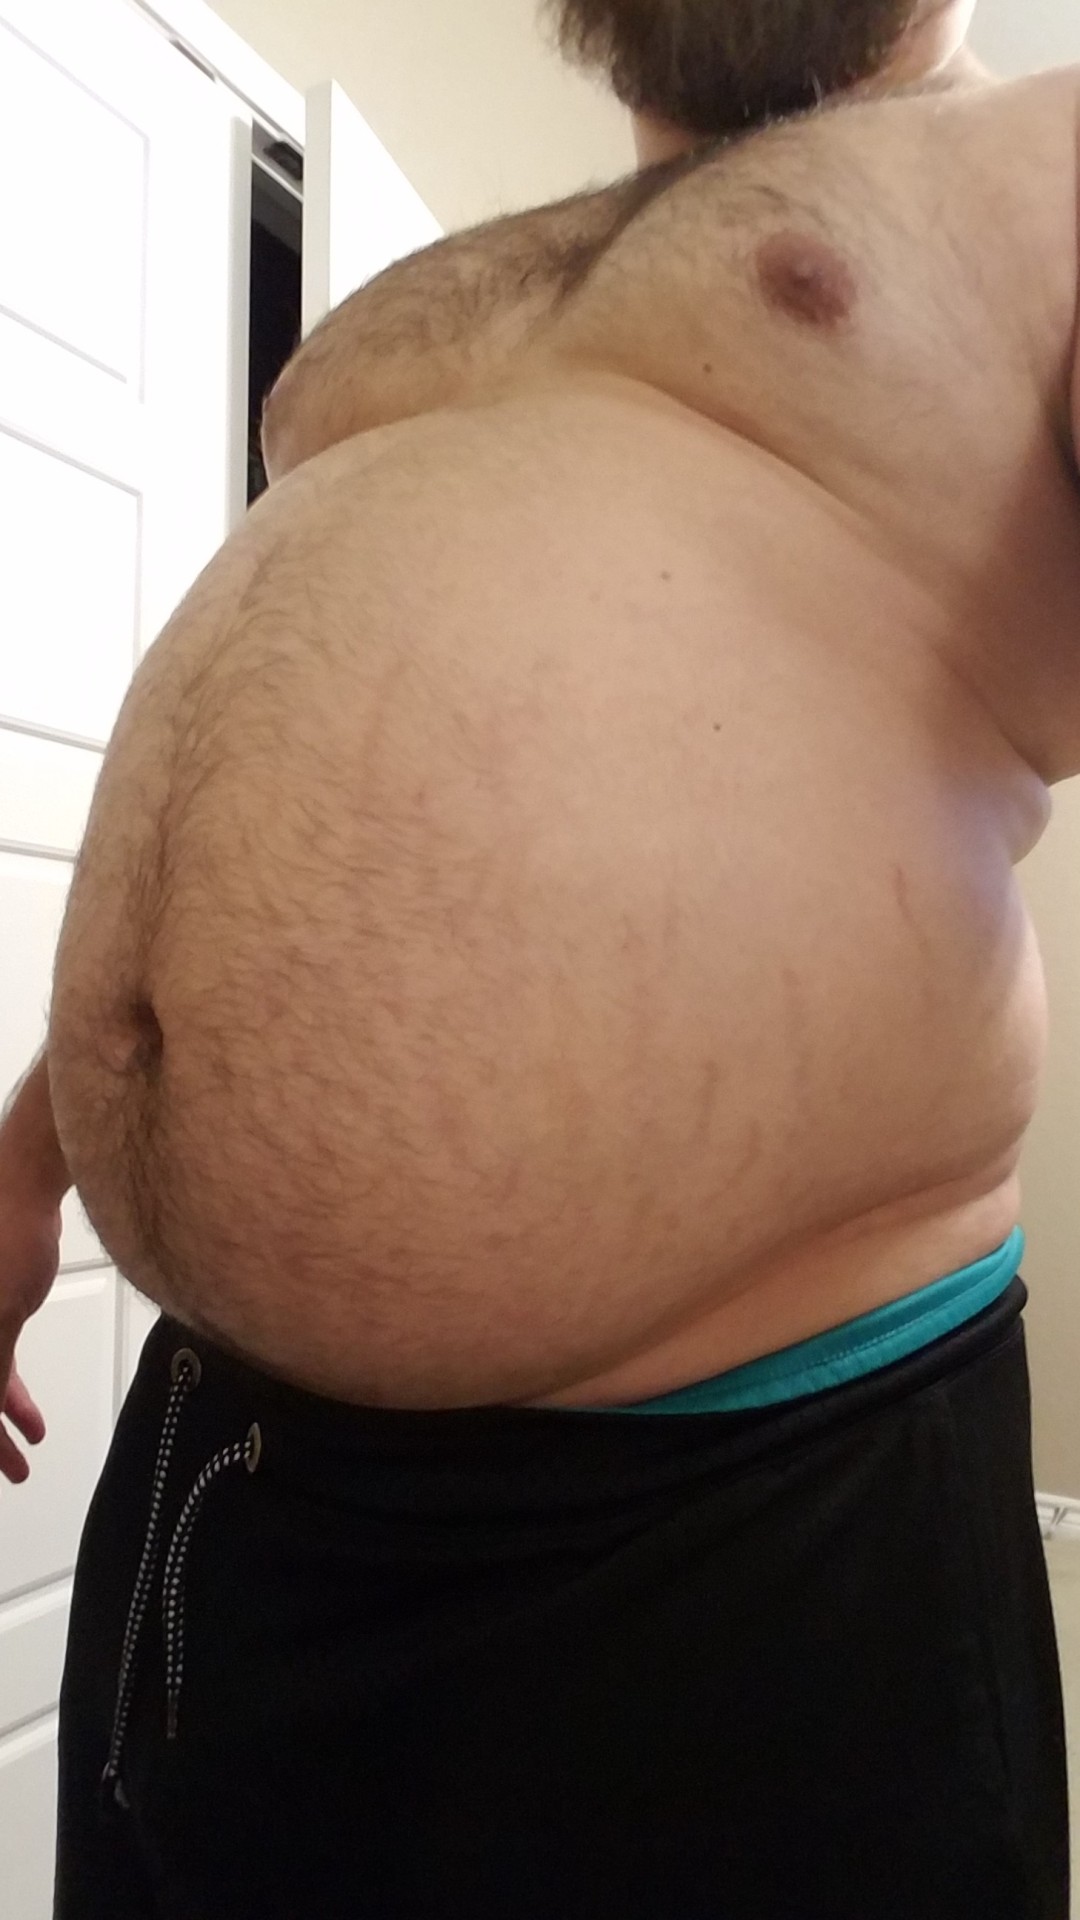 alphastuffers:Post mom bod I feel like I deflated lol slowly but surely ill fill back upXD and he’ll keep on stuffing like he has been!!